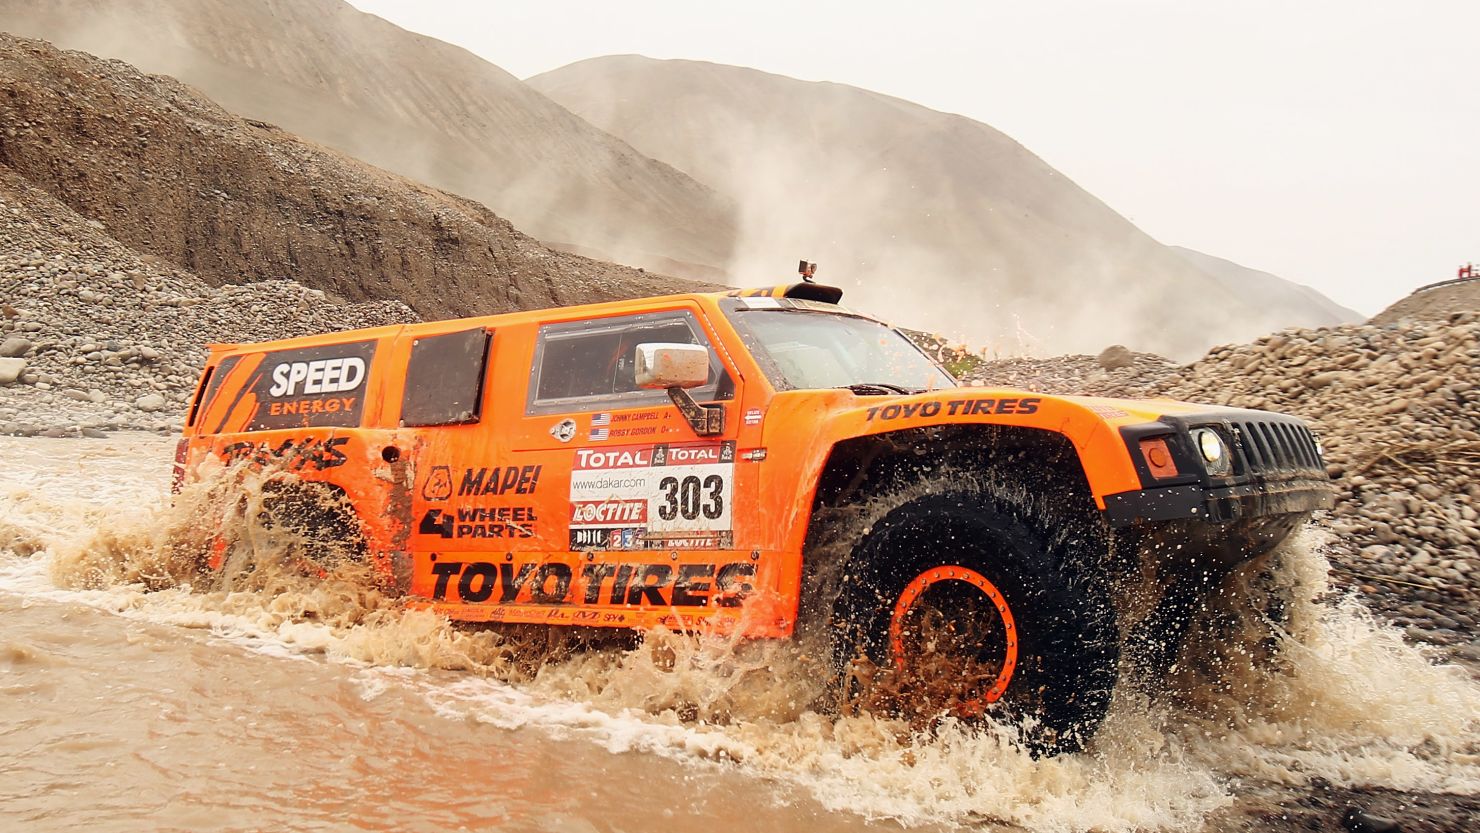 Robbie Gordon has made a big impression in his Hummer during this year's Dakar Rally.